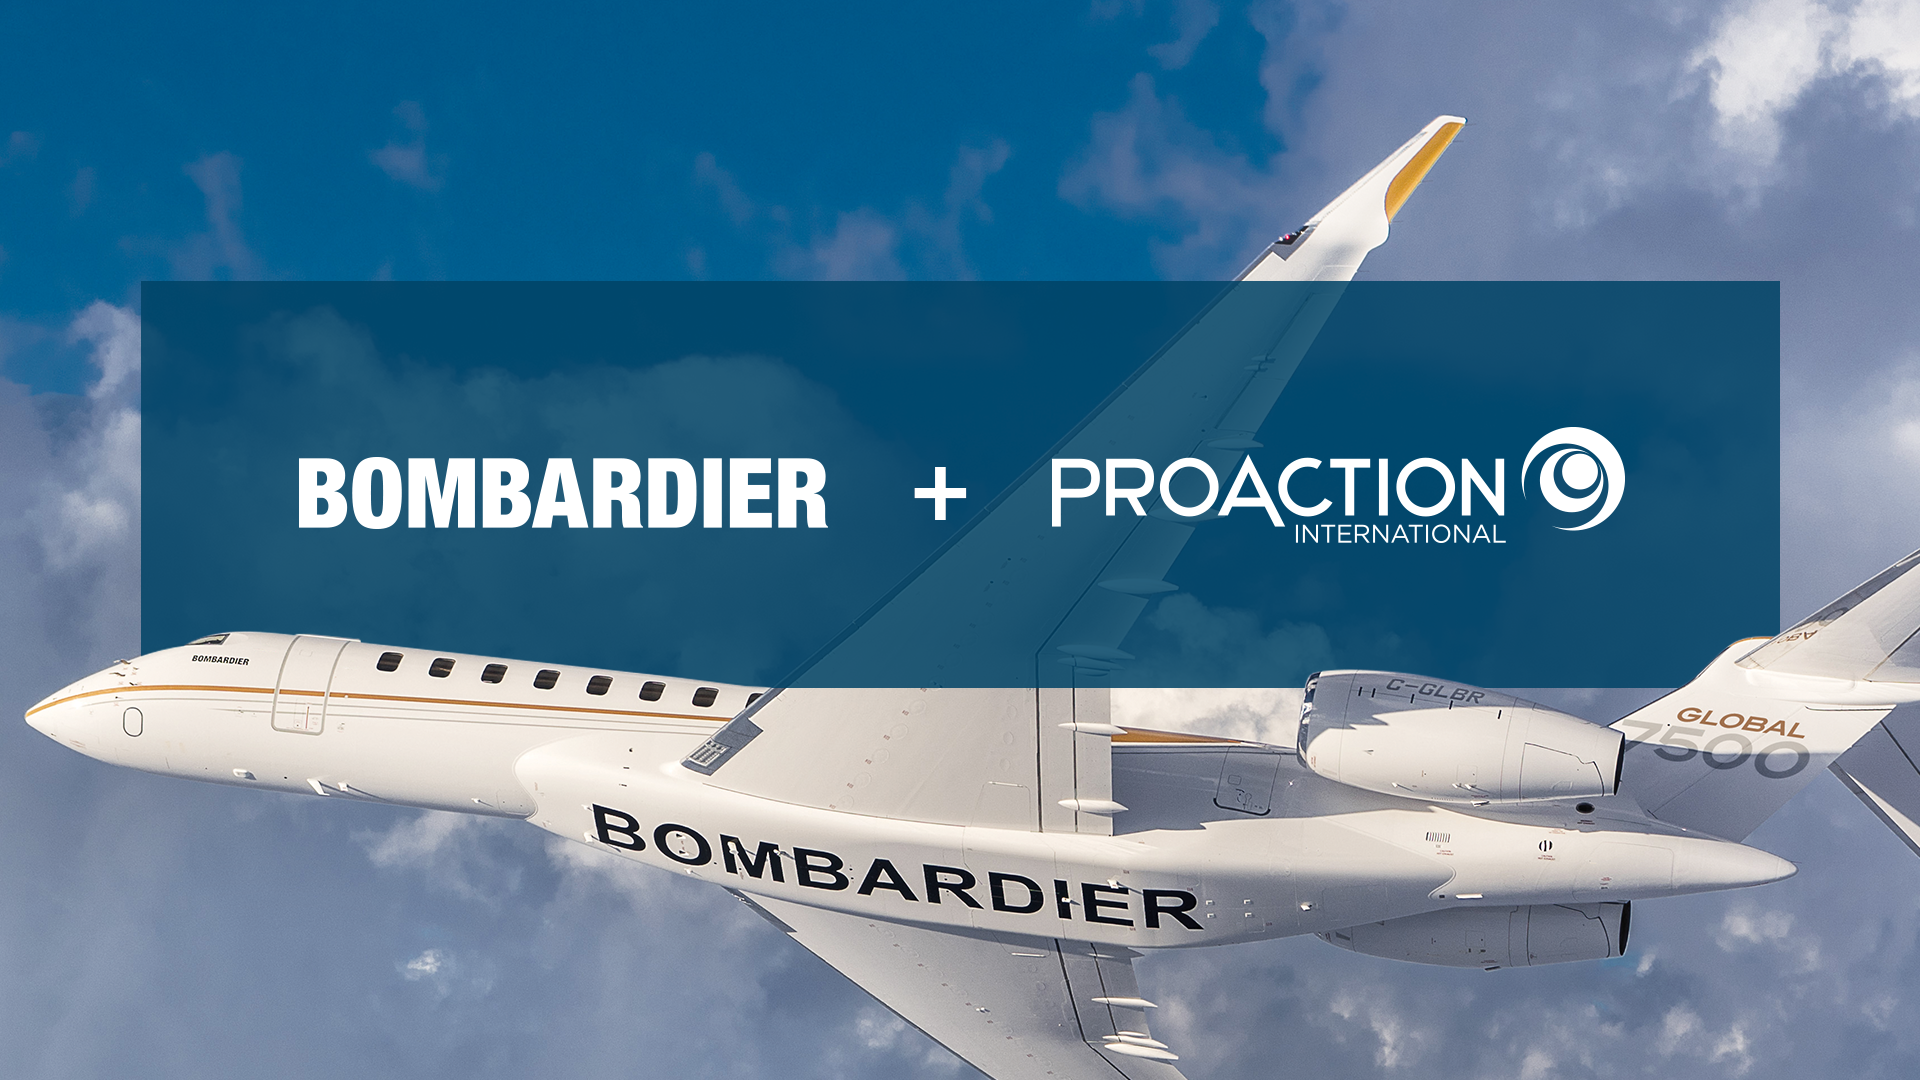 The Bombardier Center of Excellence: focused on leadership development to drive operational effectiveness